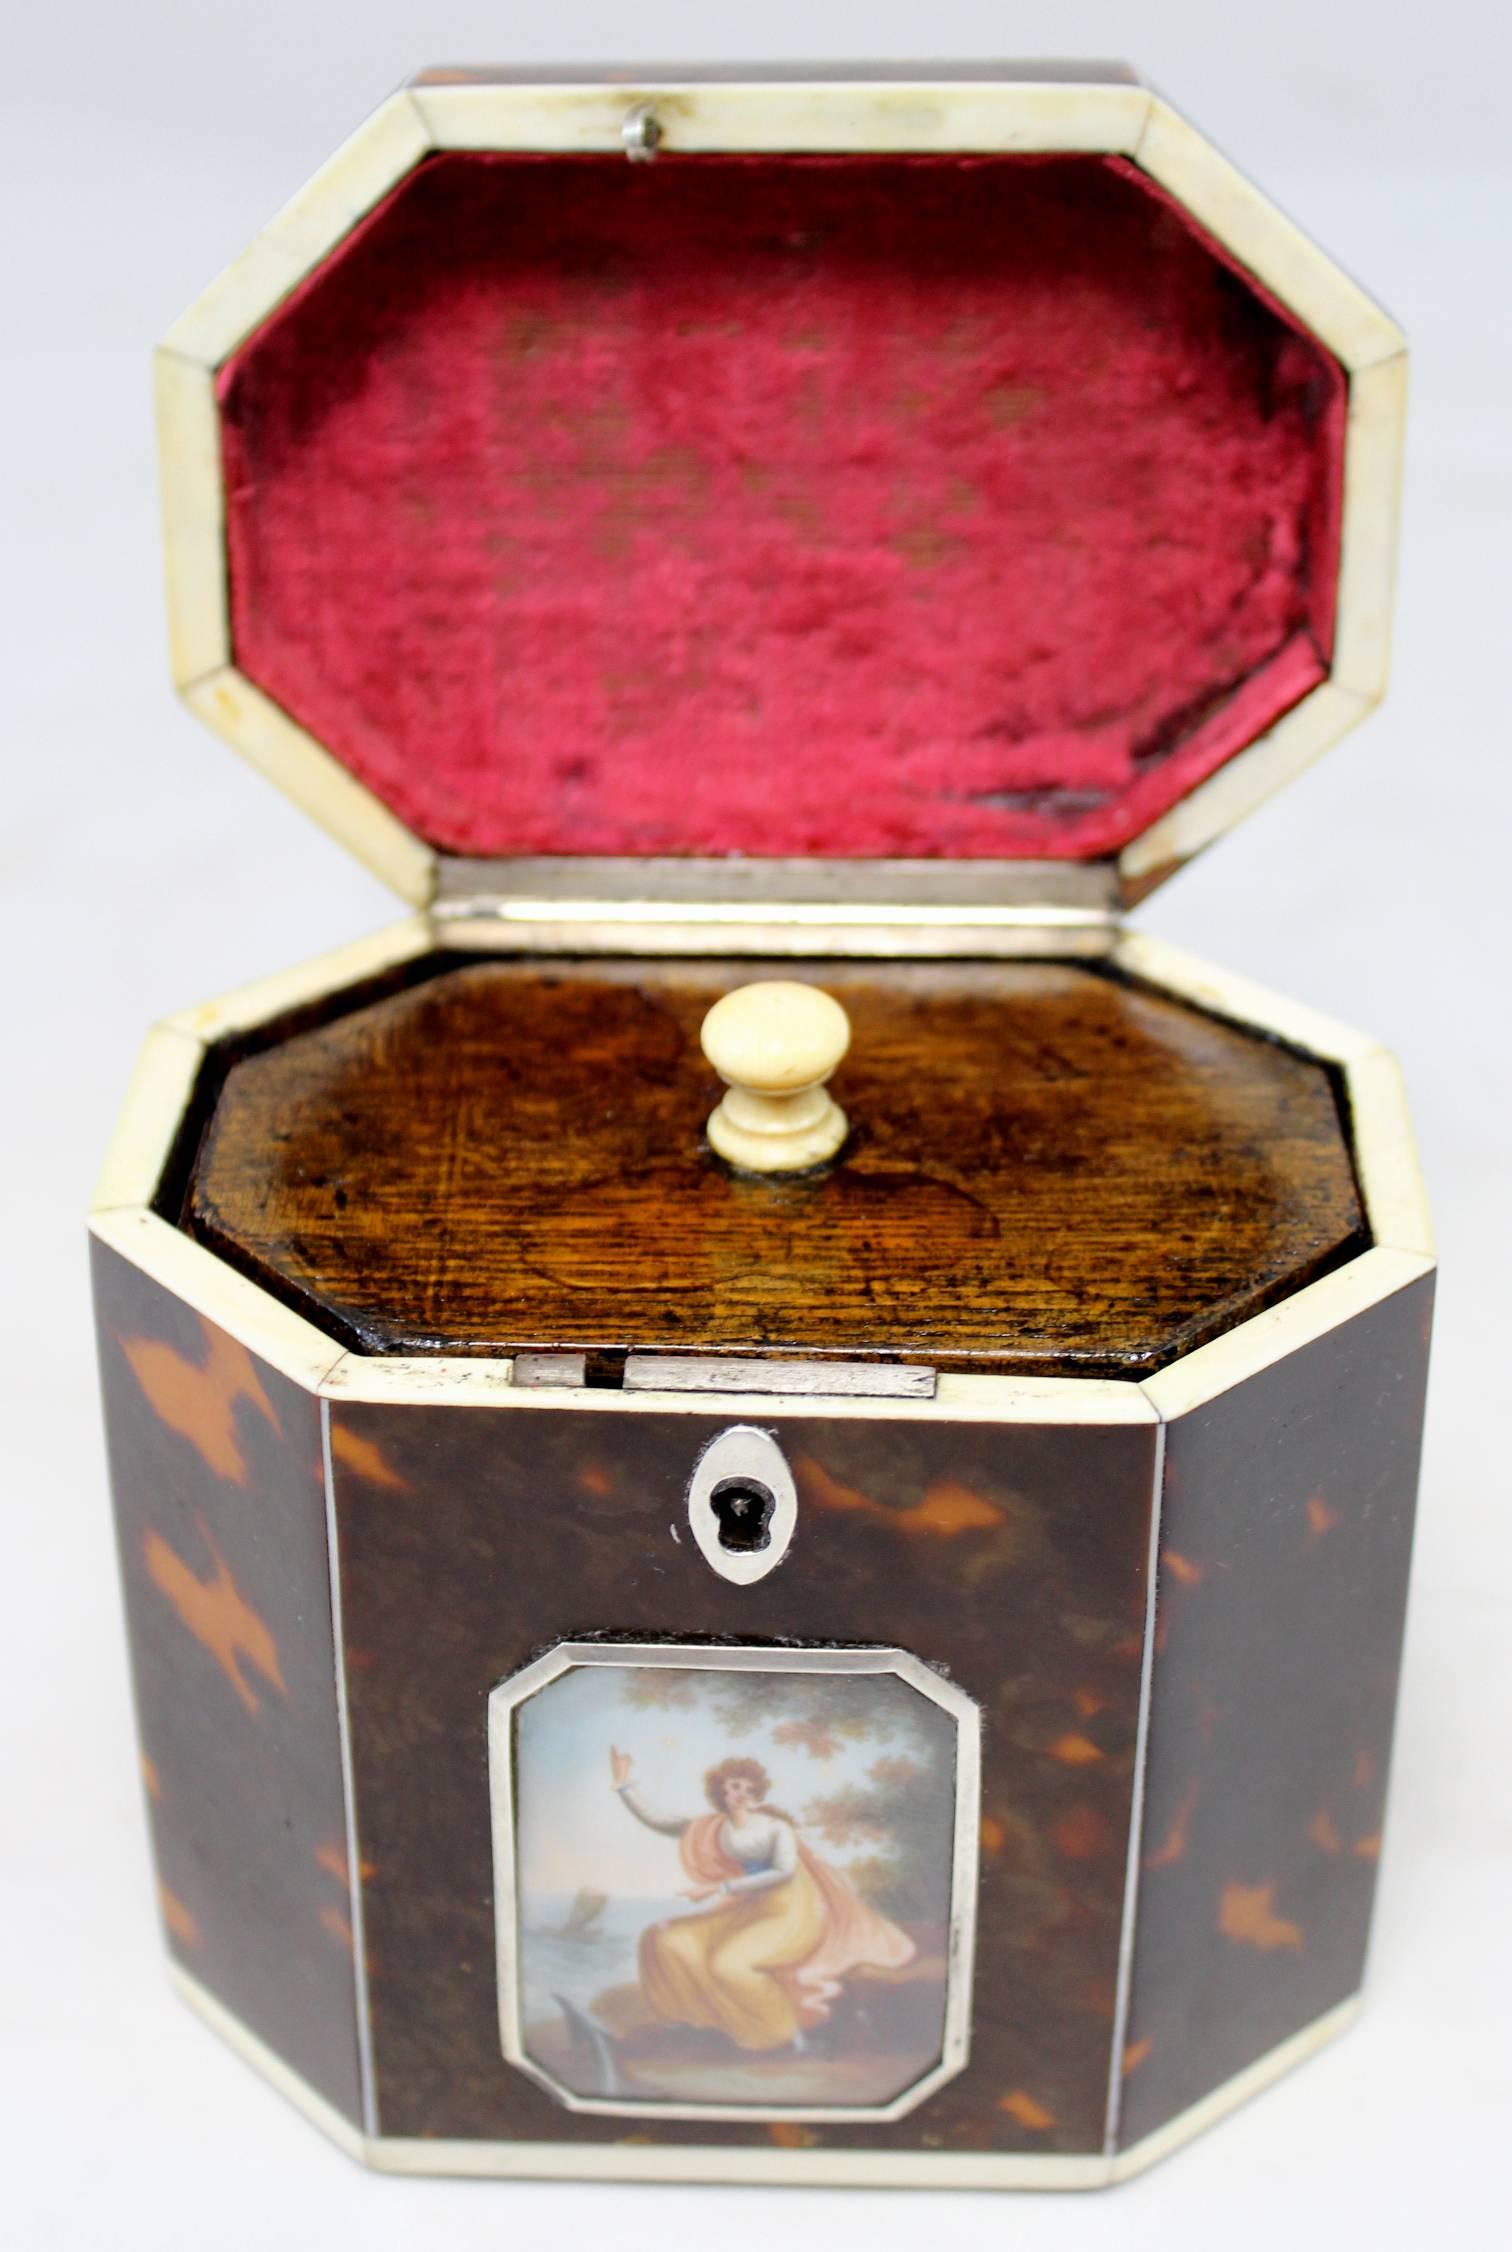 Tortoise Shell Exceptional Late 18th Century English Tea Caddy in Tortoiseshell